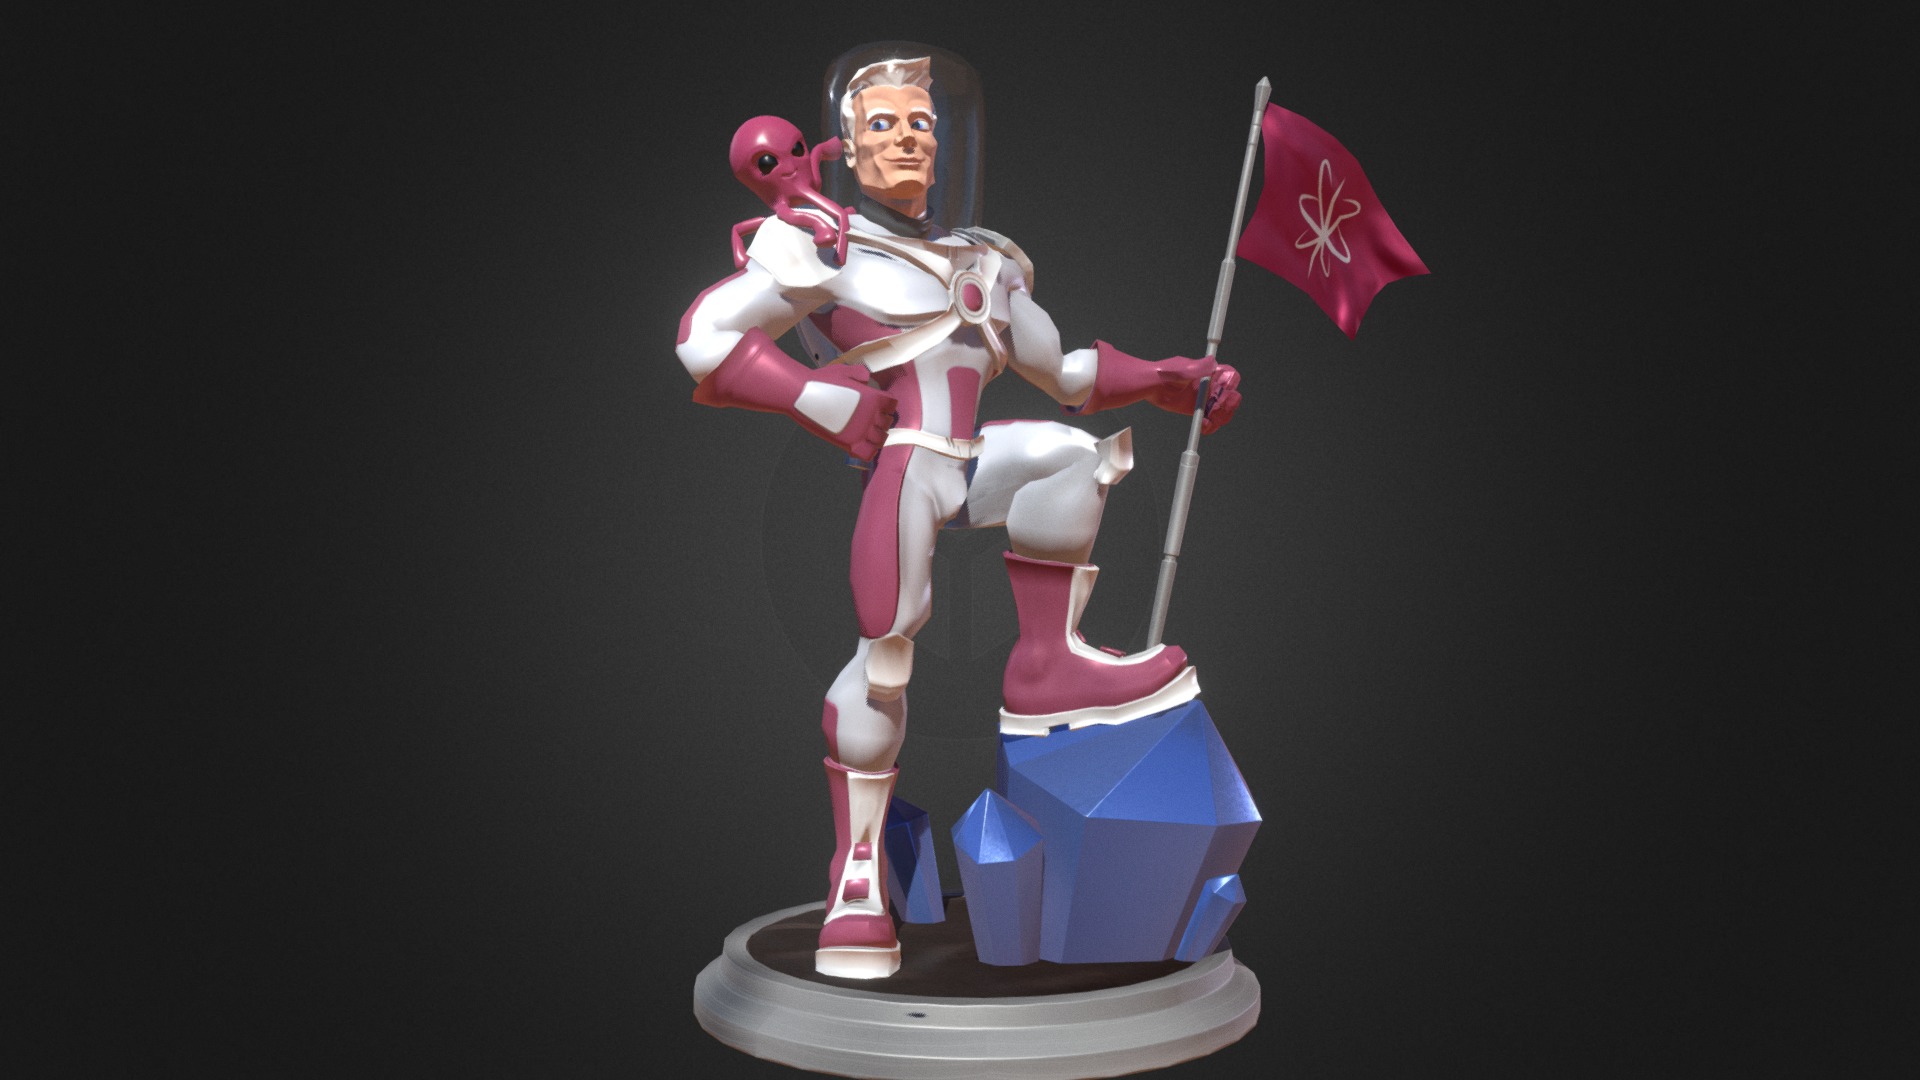 3D model Space conqueror – rigged - This is a 3D model of the Space conqueror - rigged. The 3D model is about a statue of a person holding a flag.